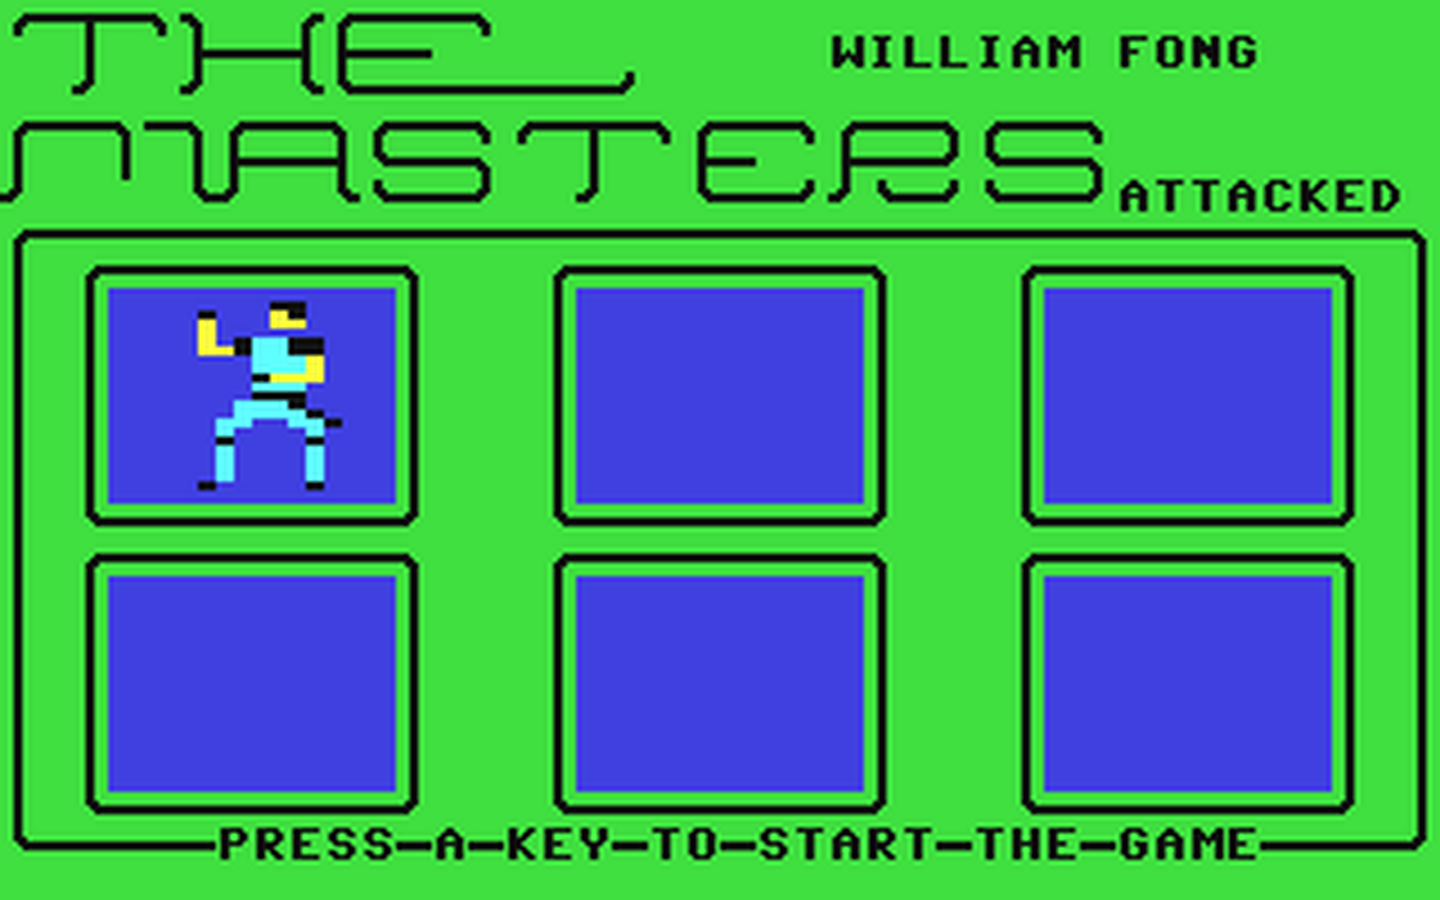 C64 GameBase Kung_Fu_Masters Argus_Specialist_Publications_Ltd./Your_Commodore 1986